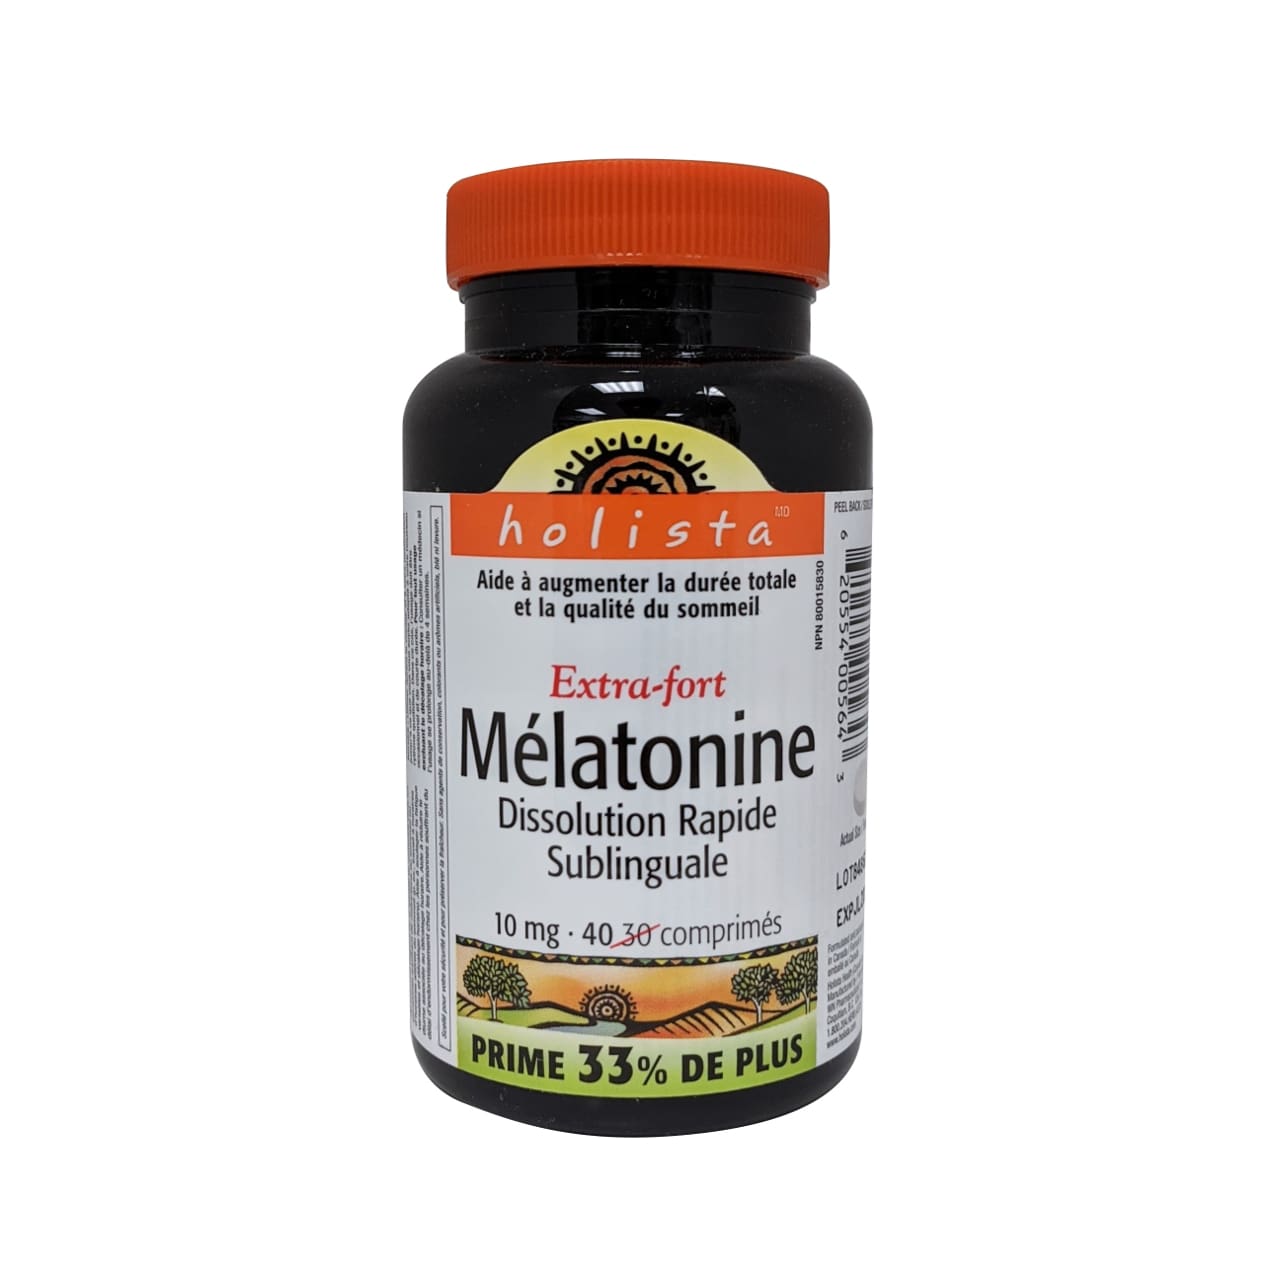 Product label for Holista Melatonin Extra Strength 10mg in French